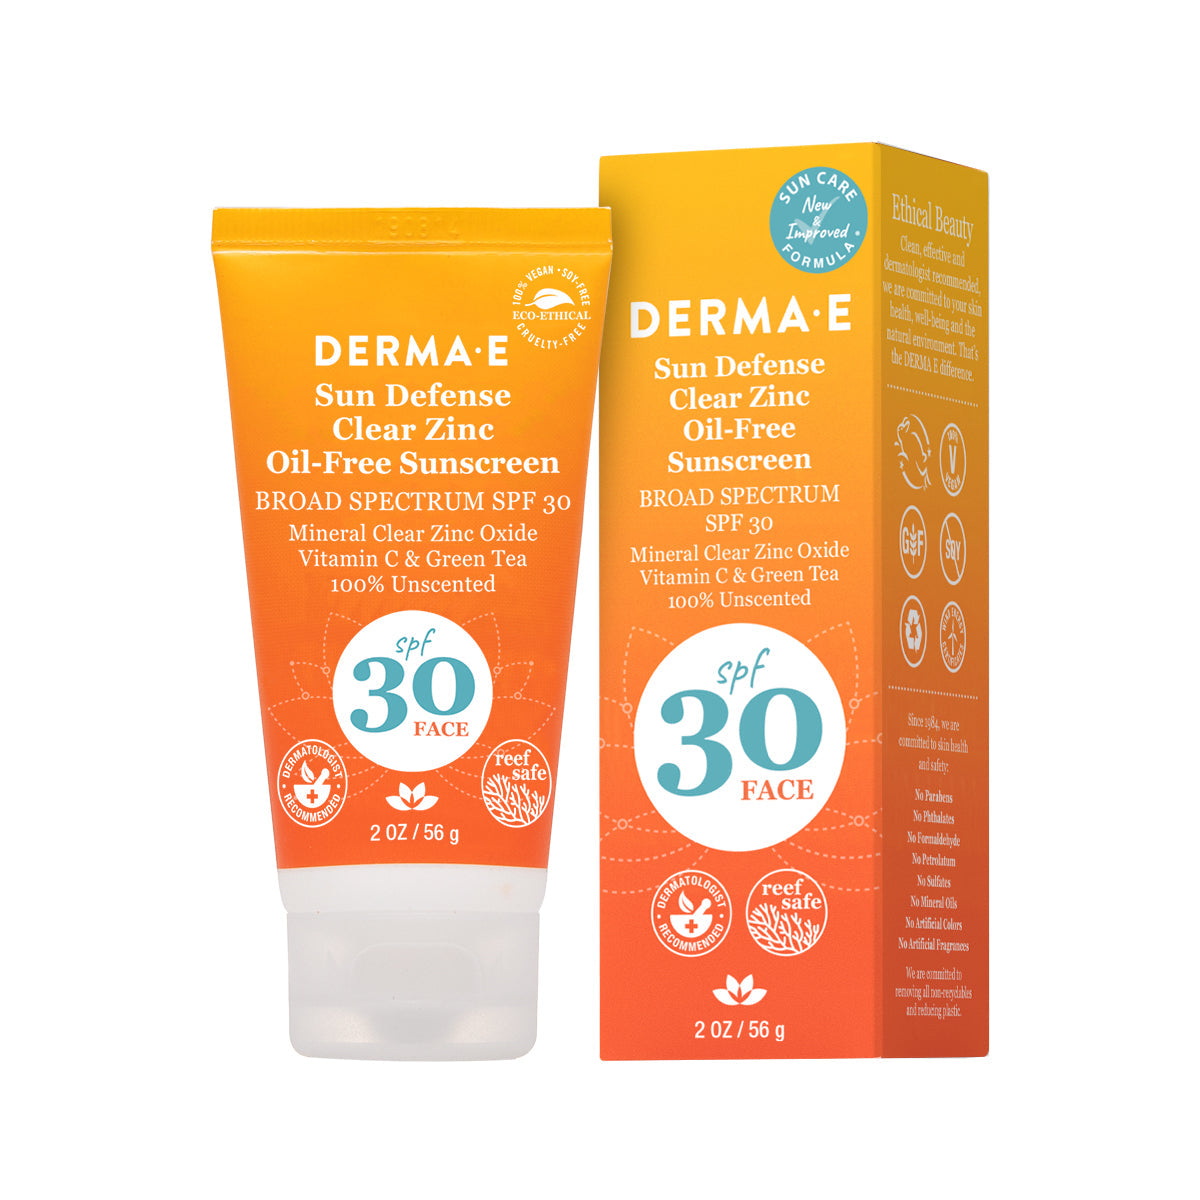 Sun Defense Mineral Oil-Free Sunscreen SPF30 Face - by DERMA E |ProCare Outlet|